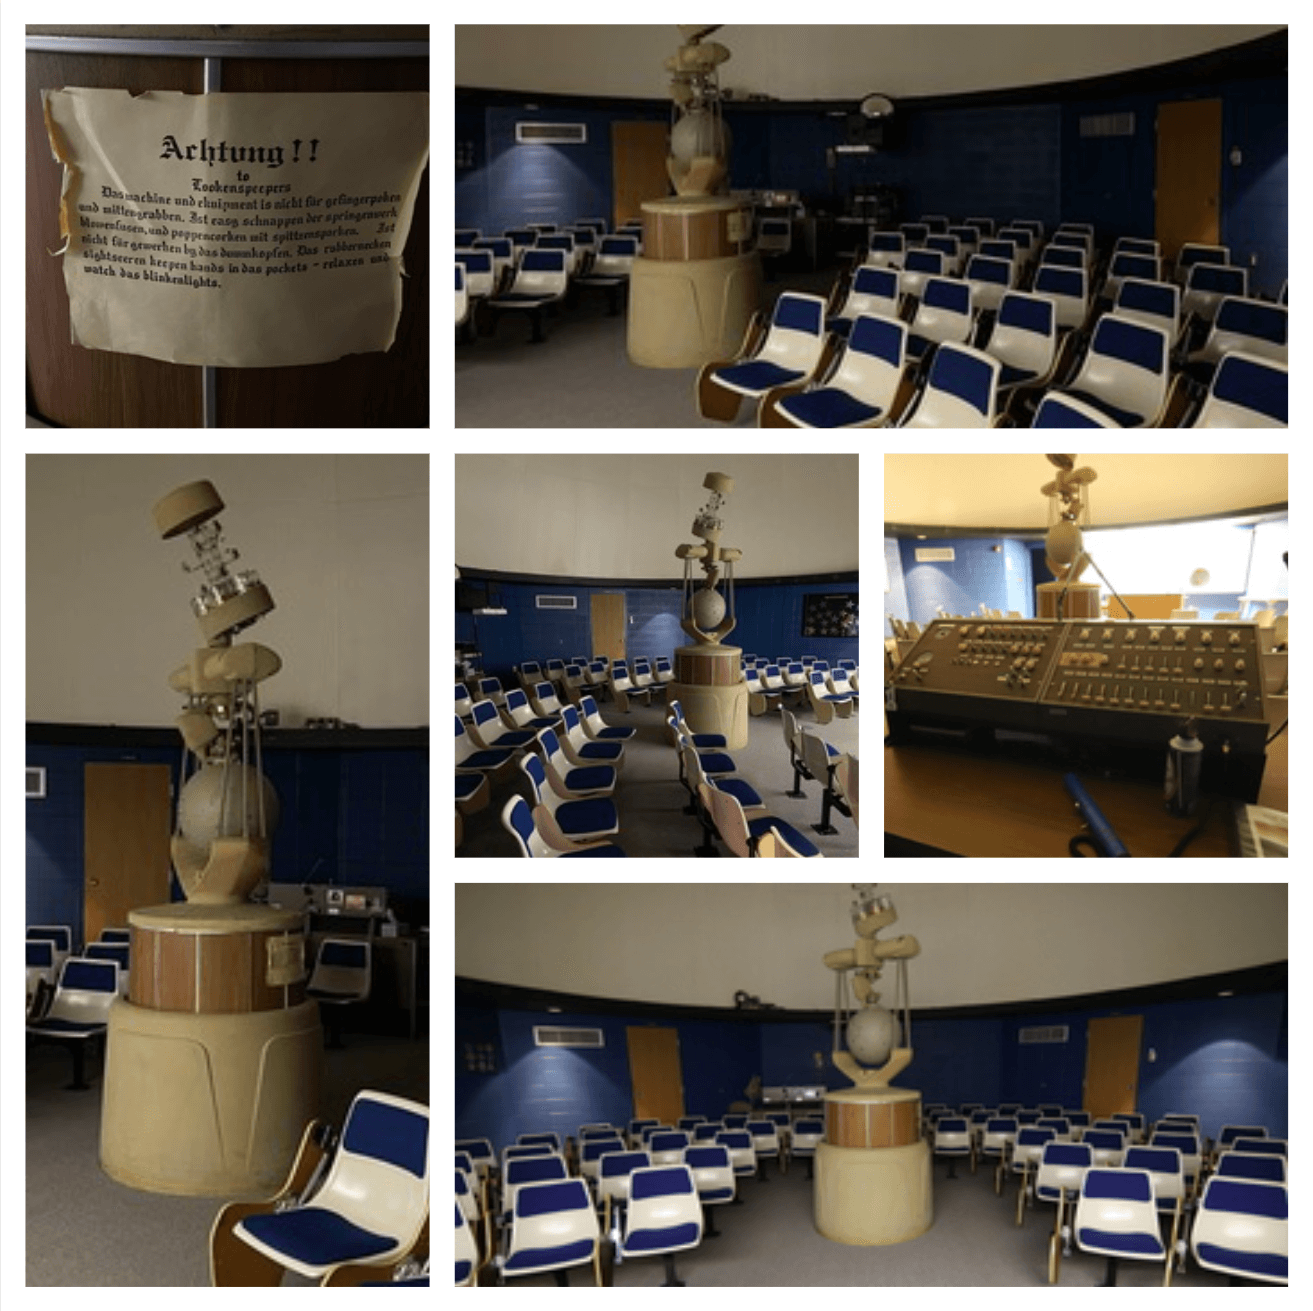 Collage of the planetarium that shows equipment, seating, and a notice written in German.